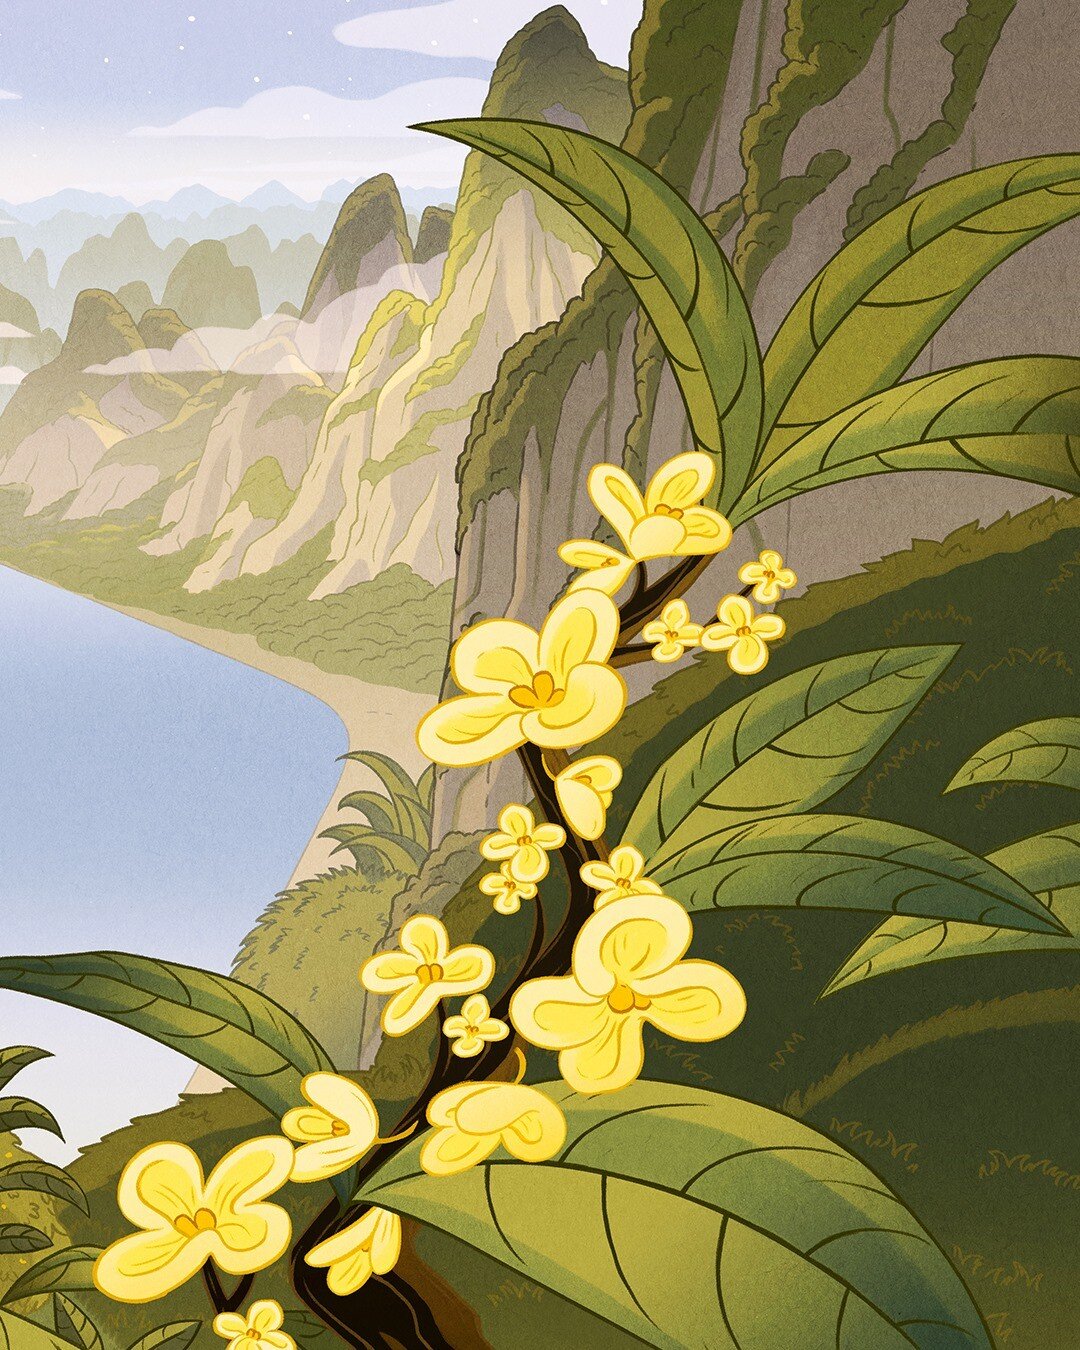 Earlier in the year I collaborated with @loccitane_uk_ire to create a promotional image for their Osmanthus Eau de Toliette. Here is a crop of the full illustration and one of the mini promos. As always big thanks to my agent @everyone_agency for all